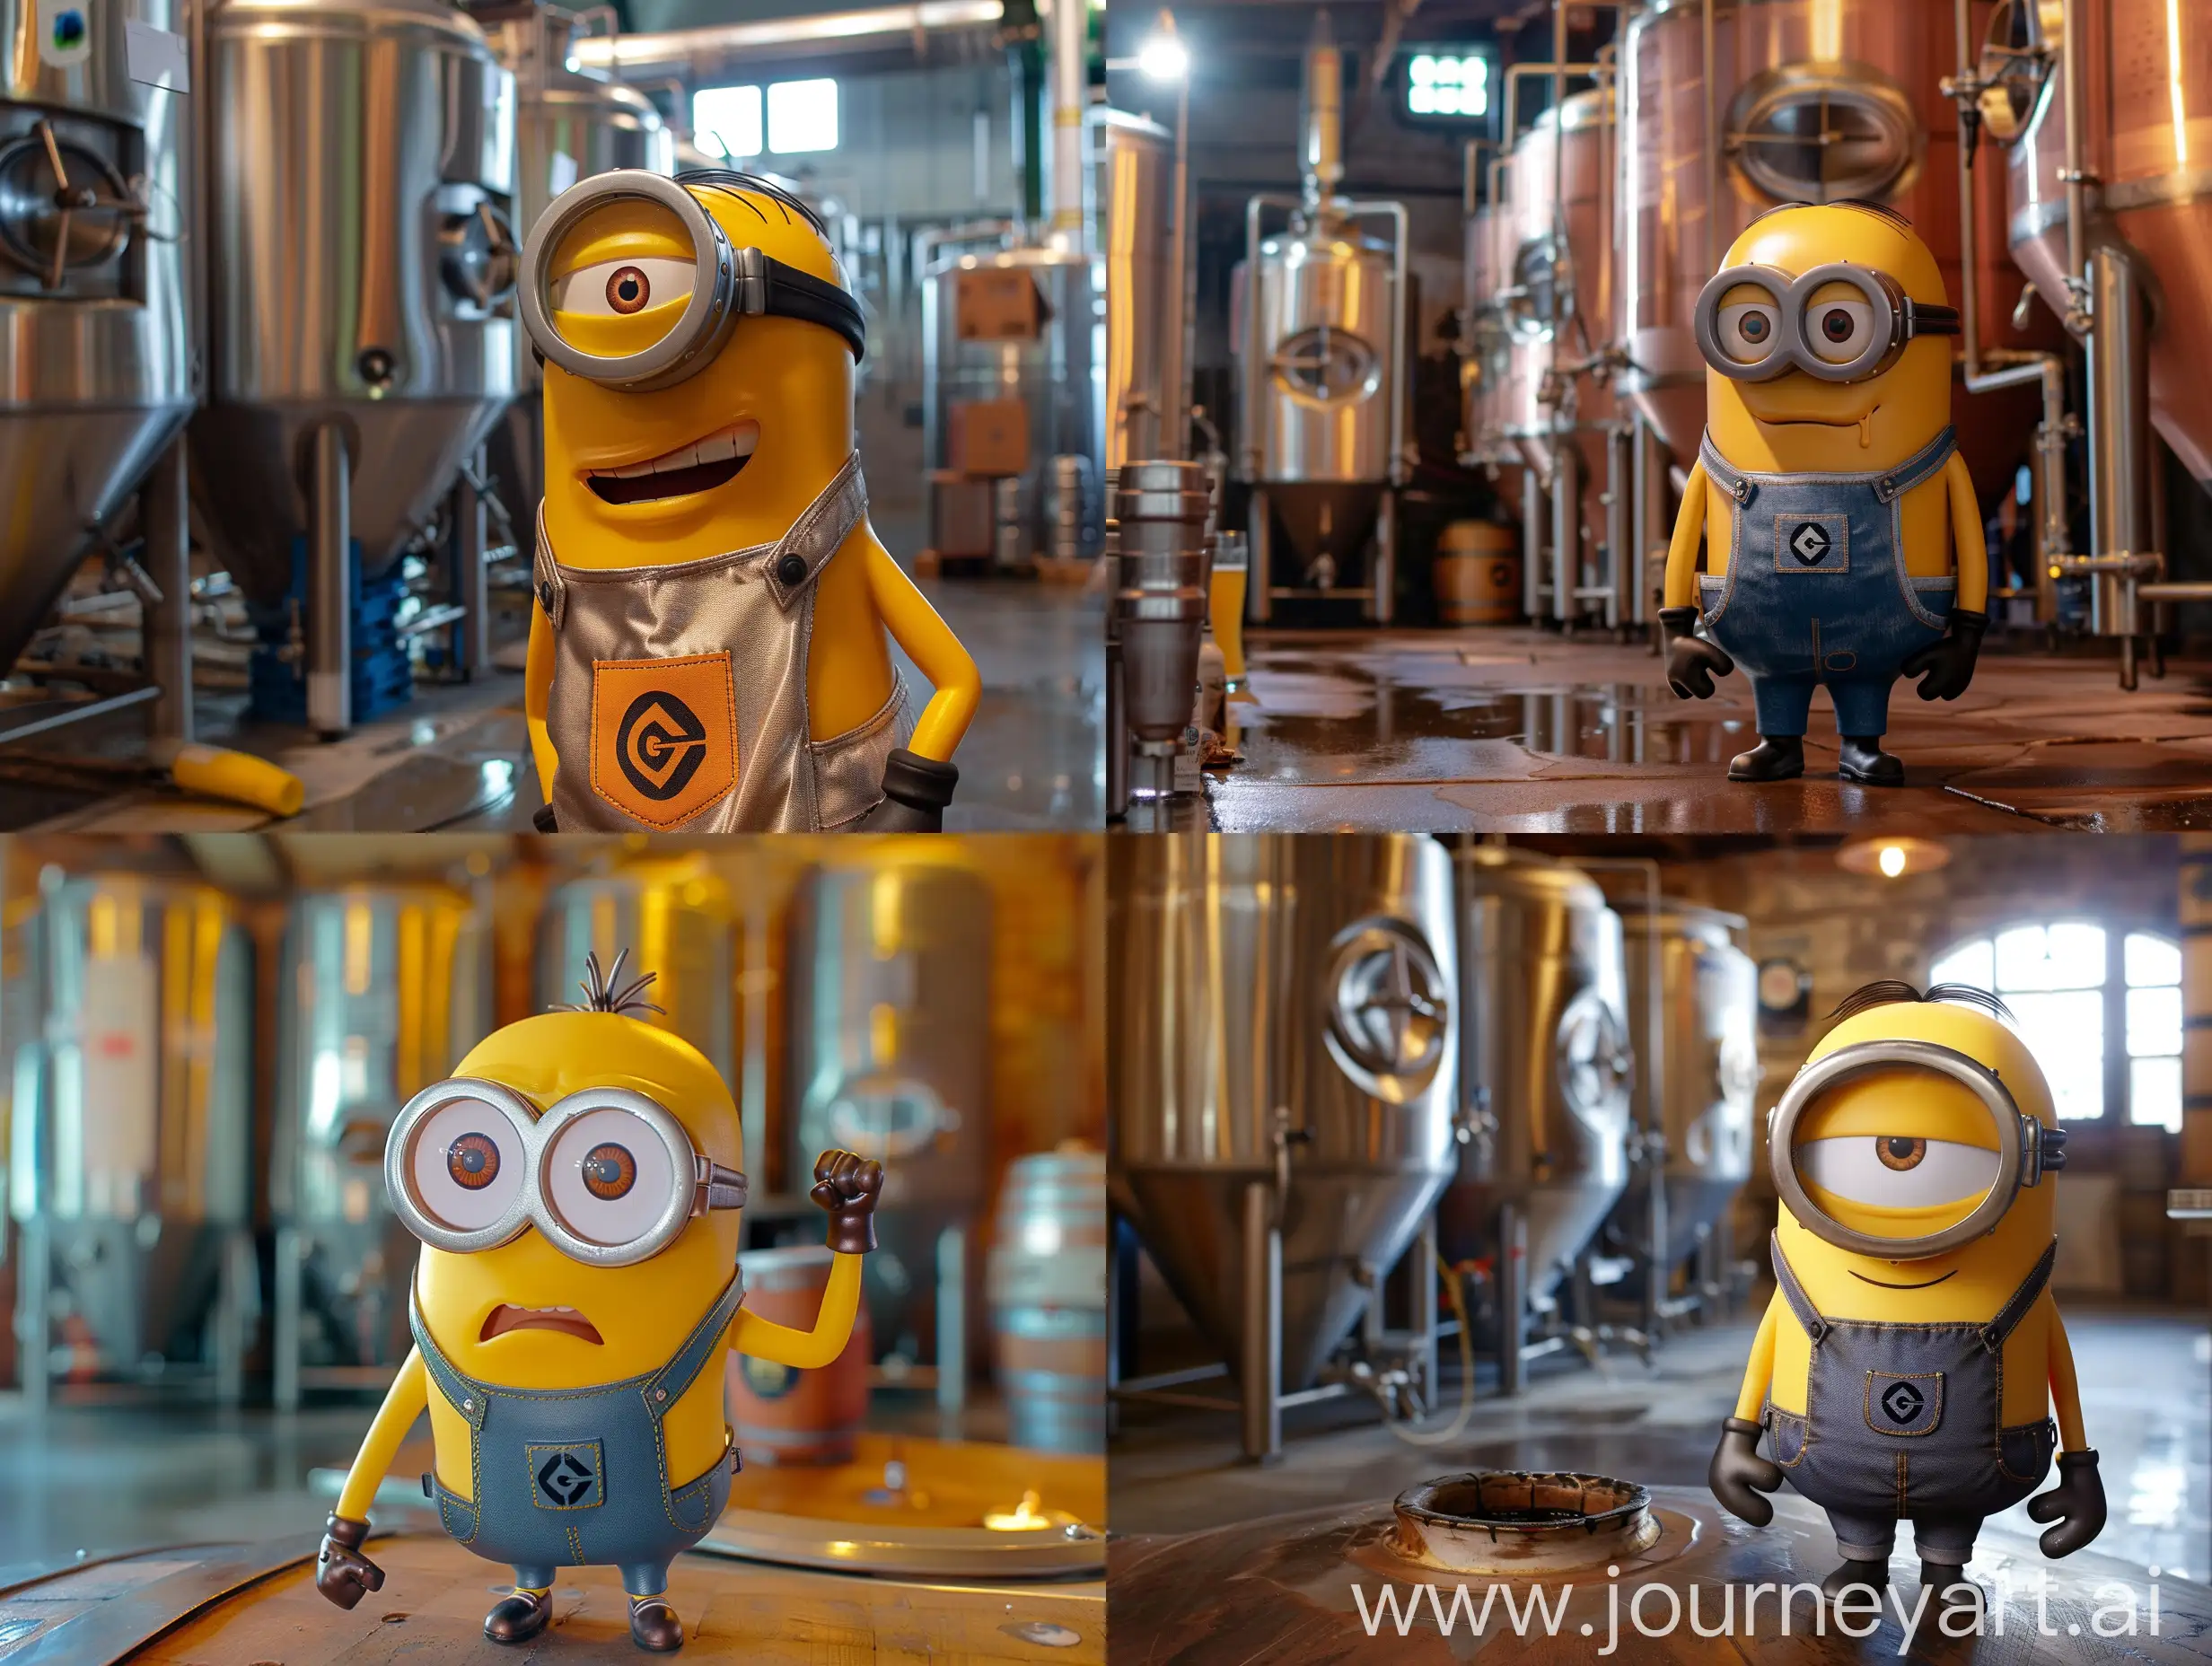 Very strong minion at the brewery